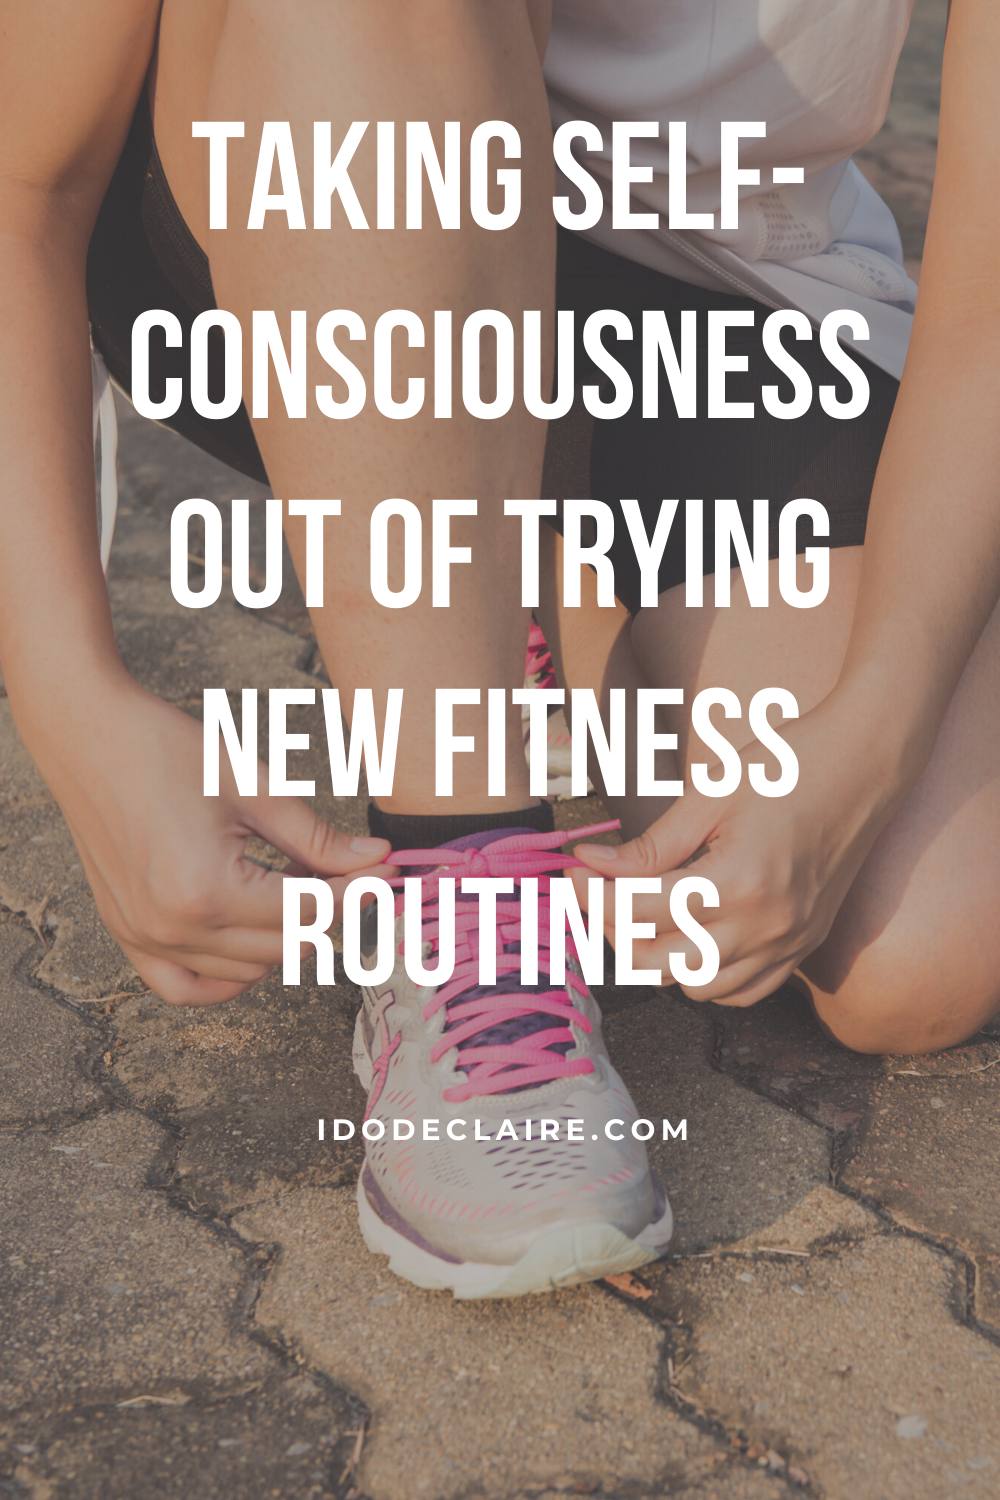 Taking Self-Consciousness Out Of Trying New Fitness Routines